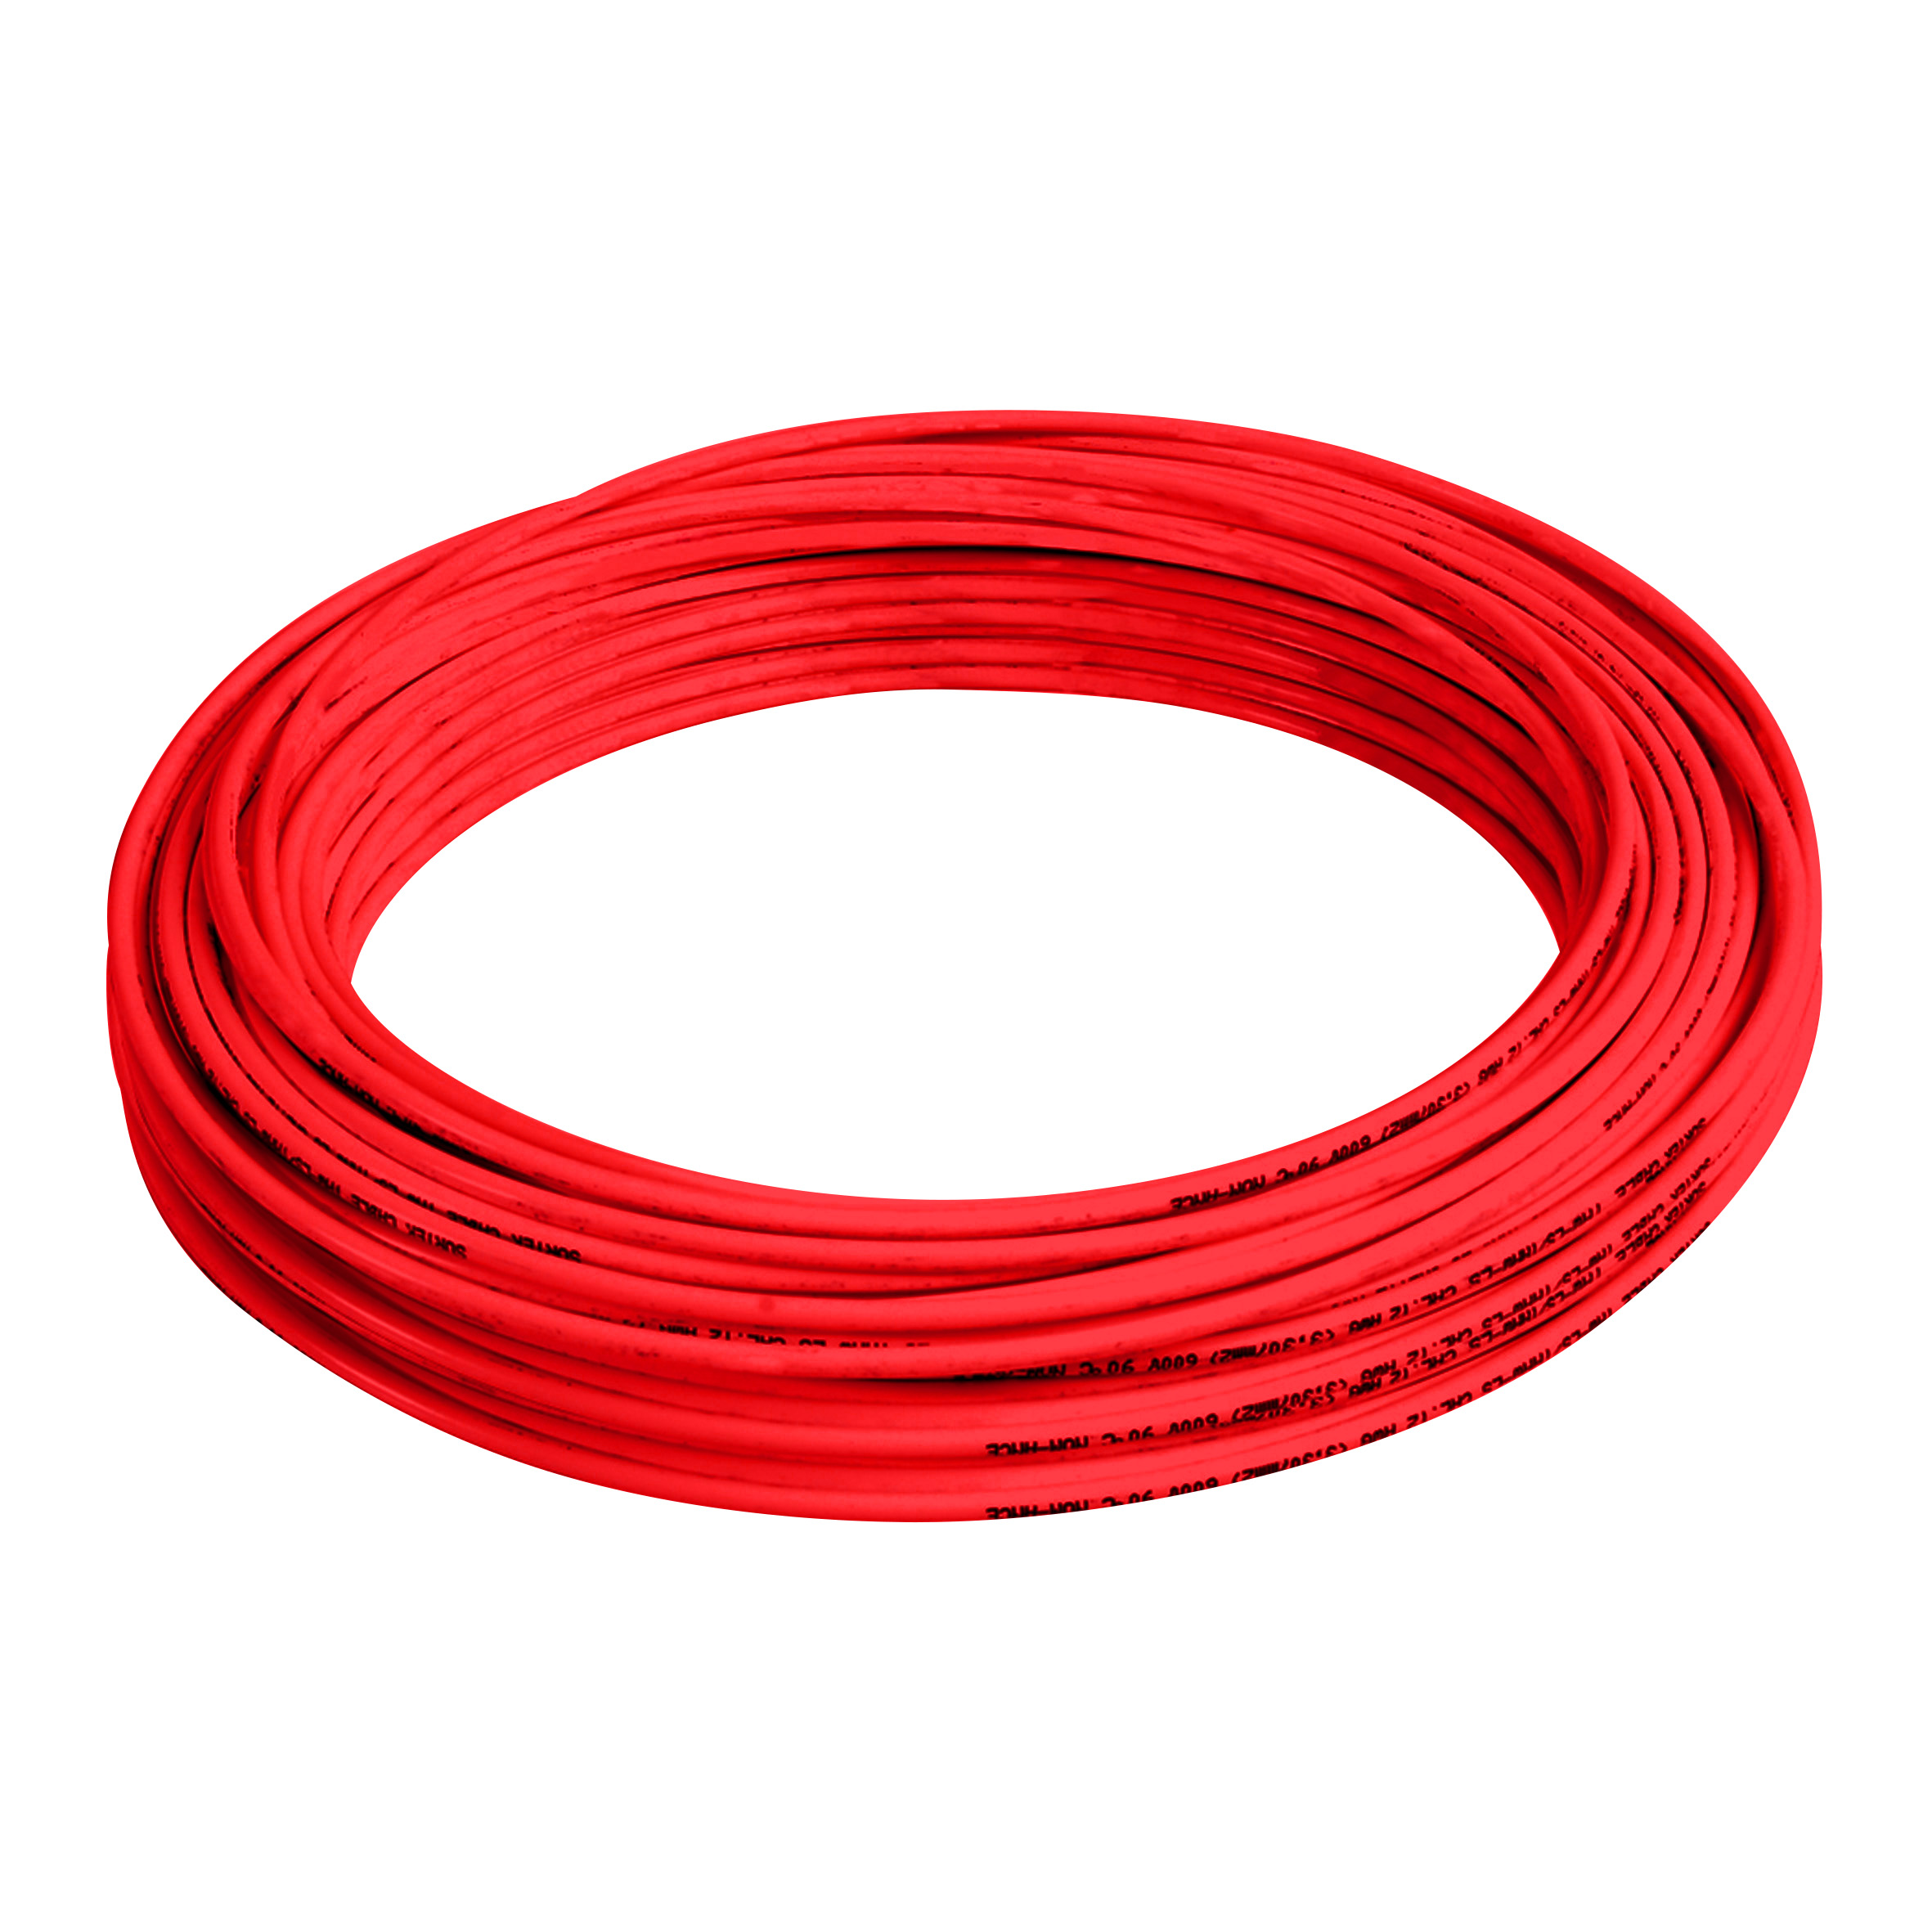 Cable eléctrico tipo THW-LS / THHW-LS Cal.14 100m rojo